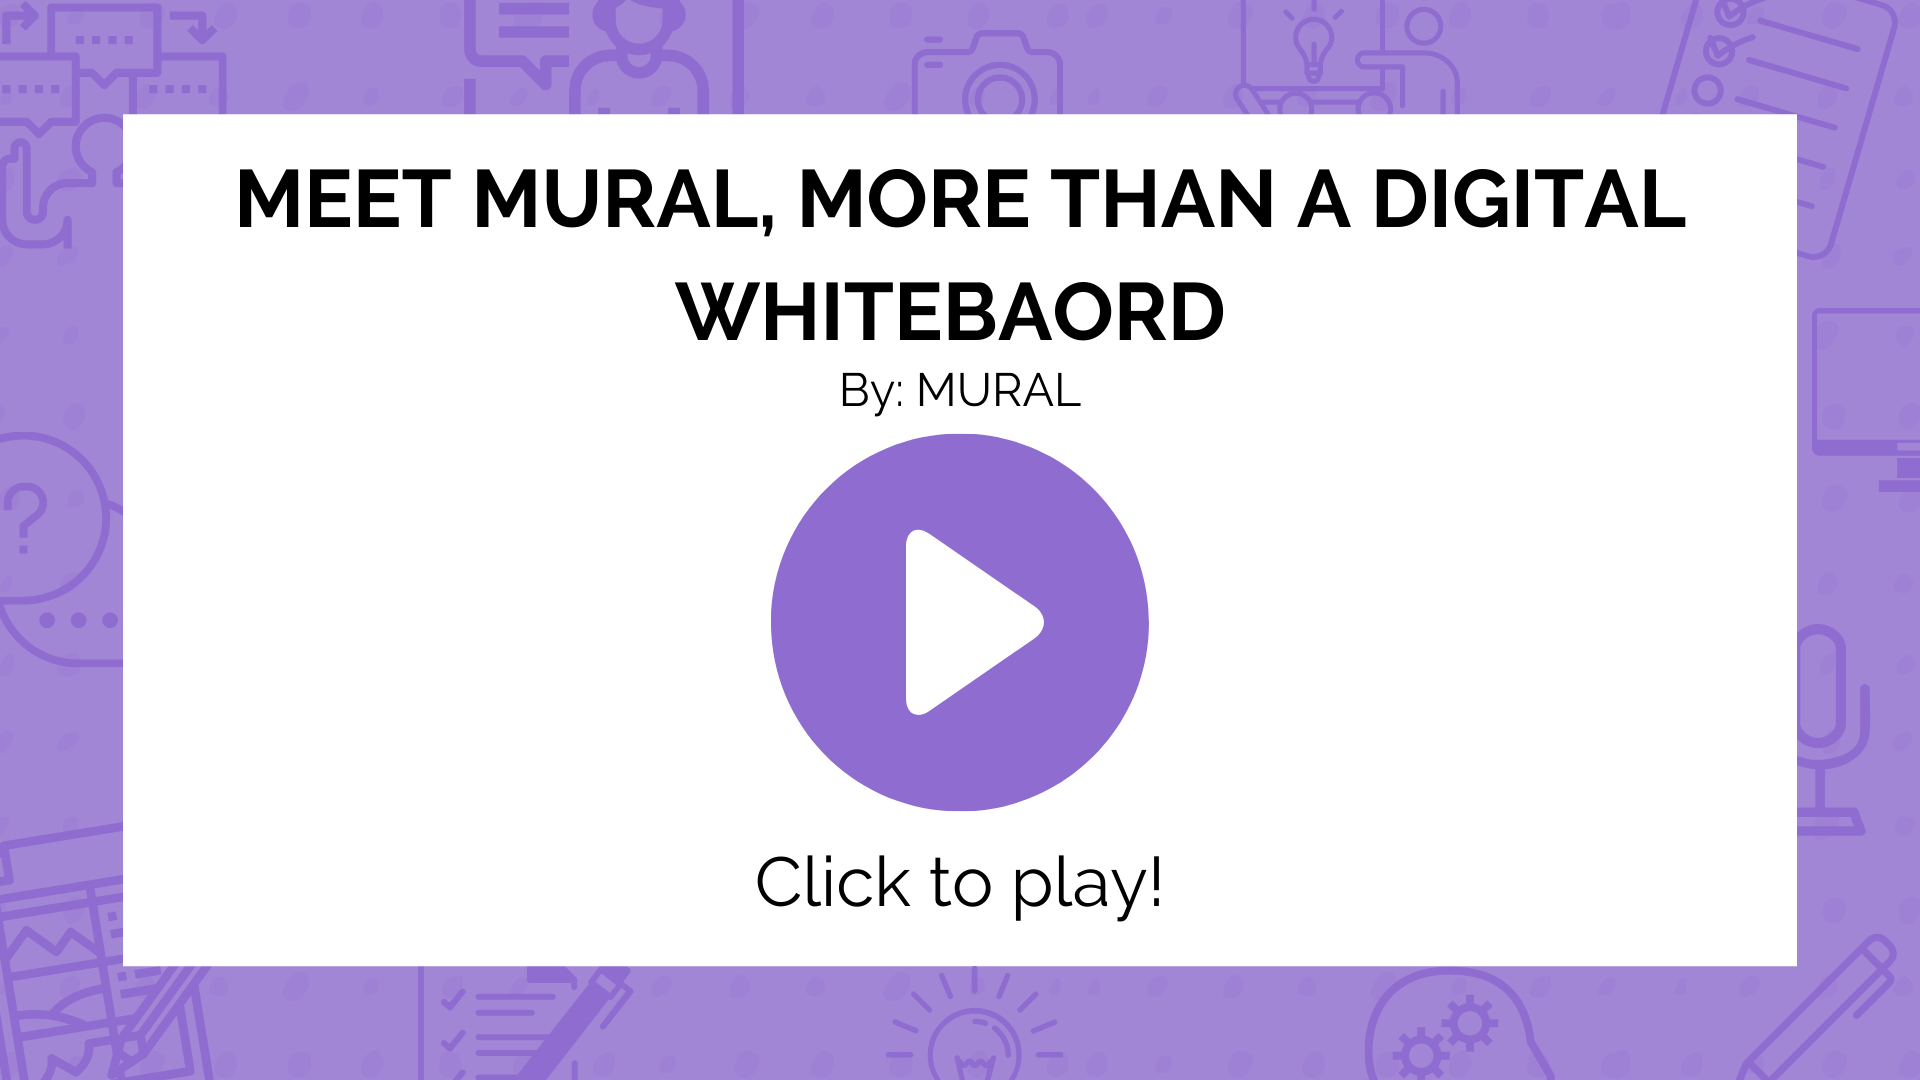 Click this image to open a YouTube video in a new tab, called Meet Mural, More than a Digital Whiteboard